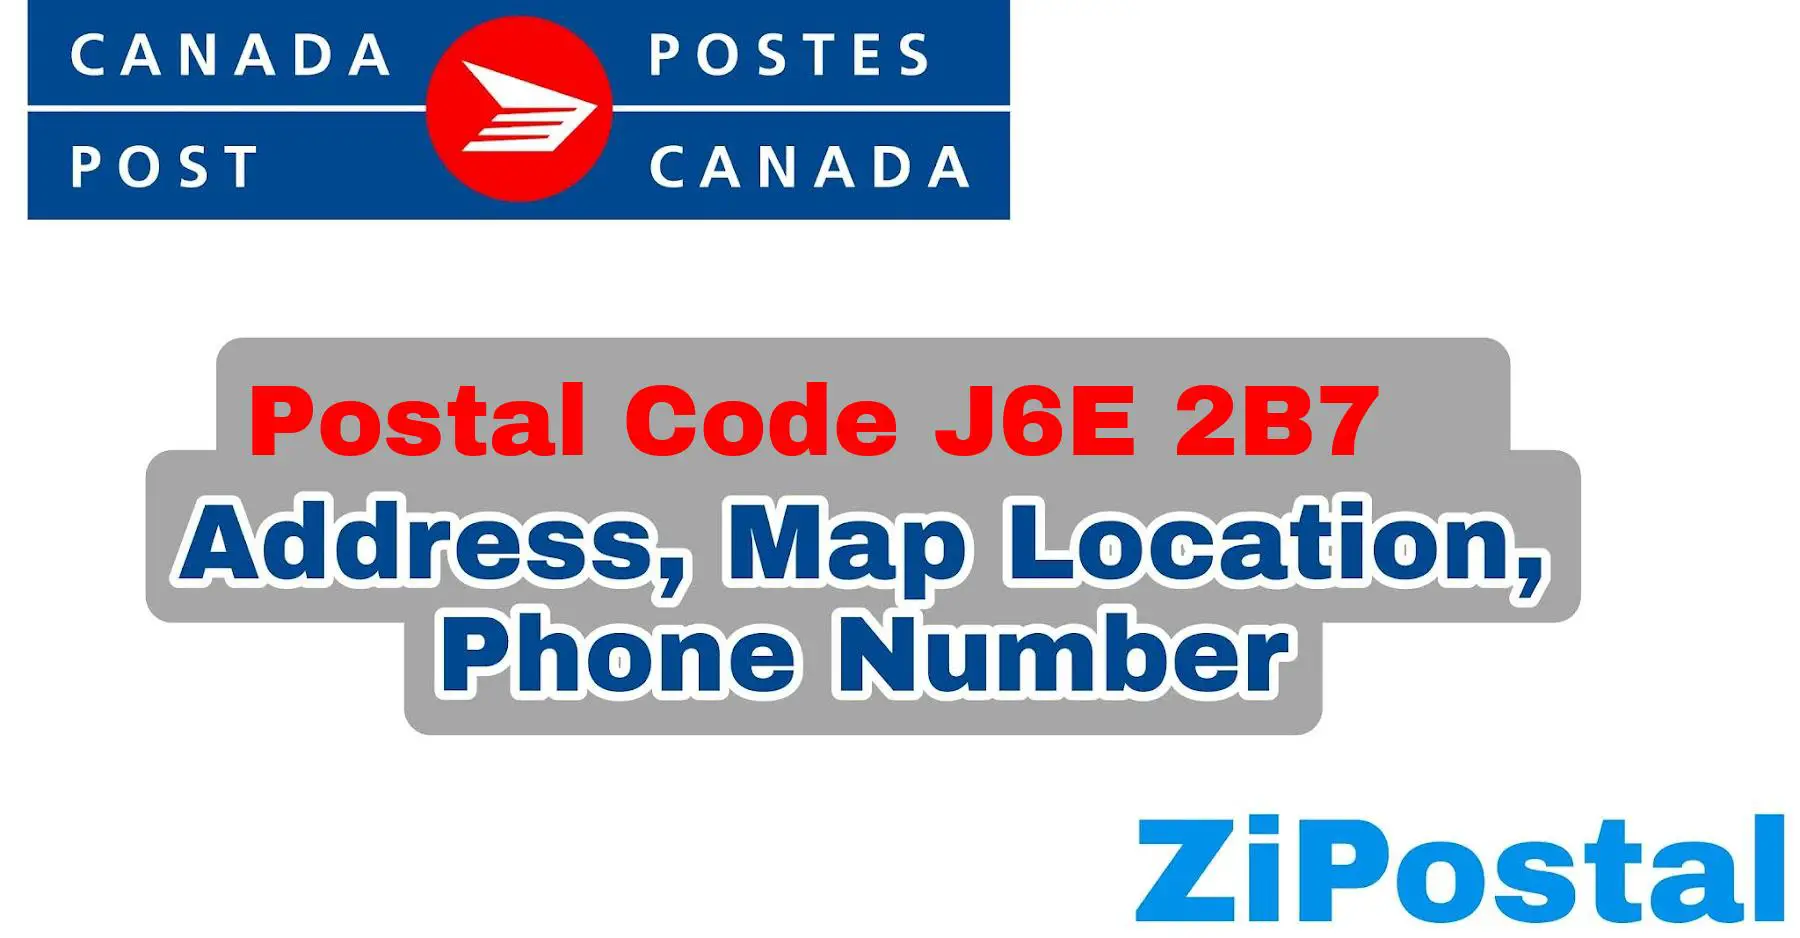 Postal Code J6E 2B7 Address Map Location and Phone Number